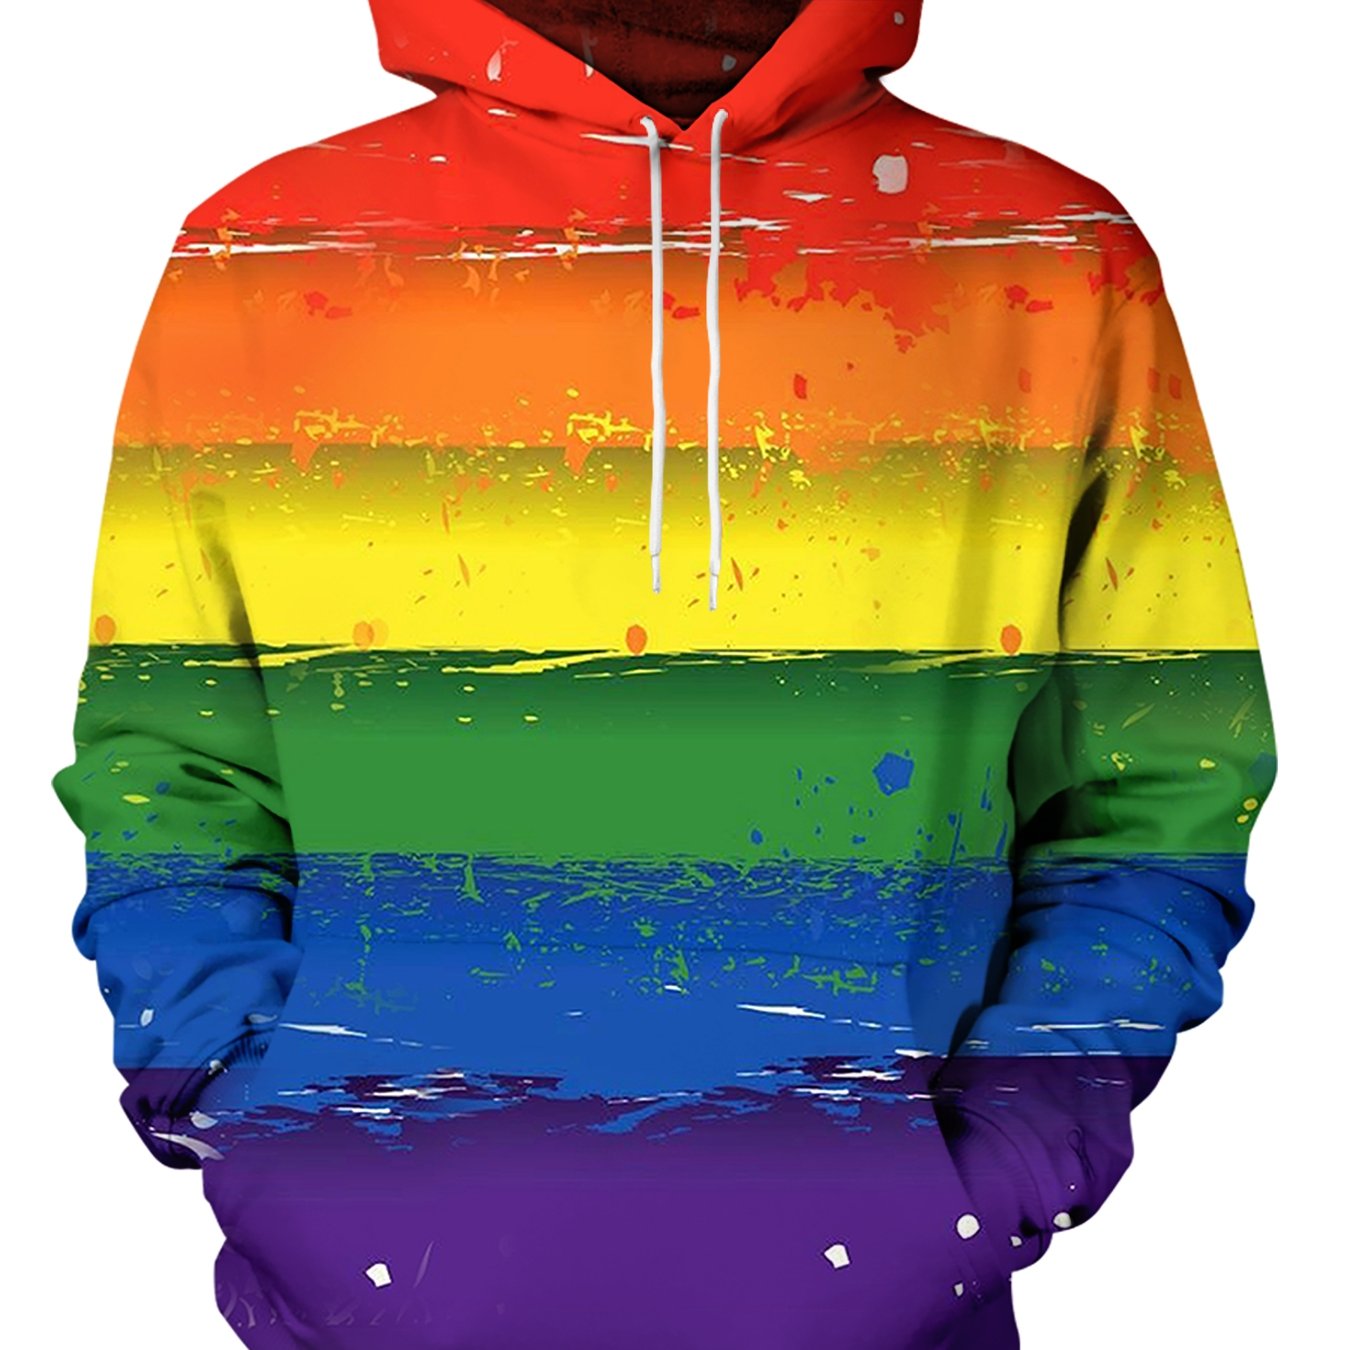 New Popular LGBT Rainbow Flag Pattern Print .Men's Long Sleeve Hoodies Street Casual Sports And Fashionable With Kangaroo Pocket Sweatshirt, Suitable For Outdoor Sports .For Autumn And Sp